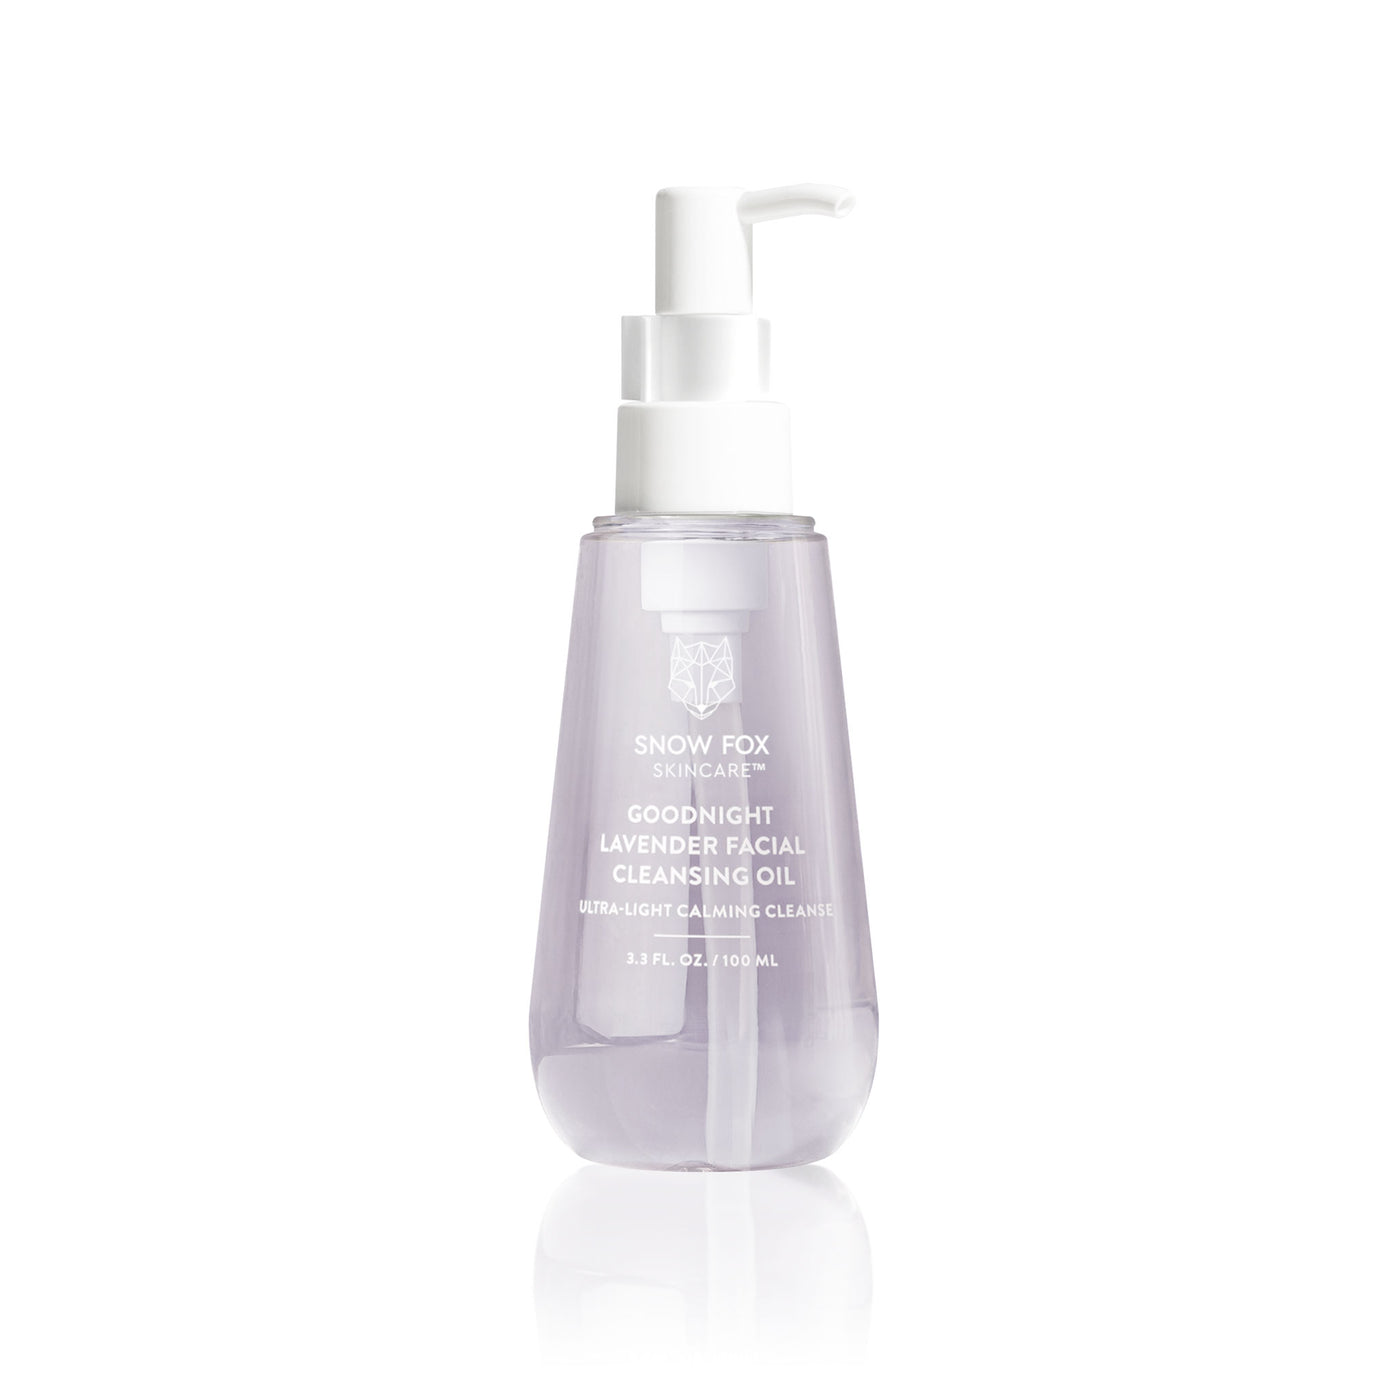 A comforting, barrier supporting facial cleansing oil that washes off both make up and dirt without stripping skin barriers